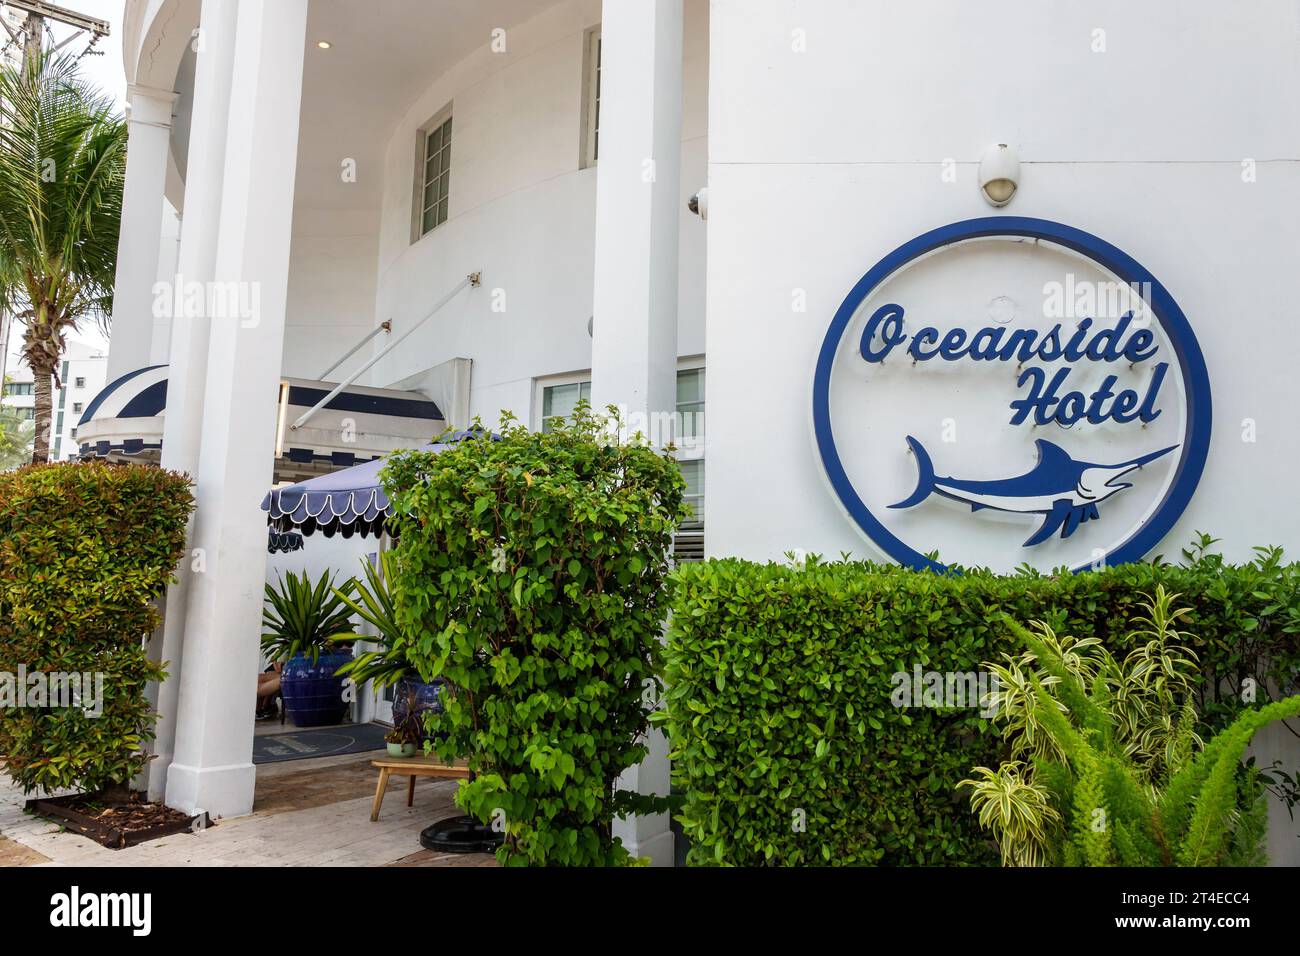 Miami Beach Florida,outside exterior,building front entrance hotel,Collins Avenue,Oceanside Hotel sign,hotels motels businesses Stock Photo